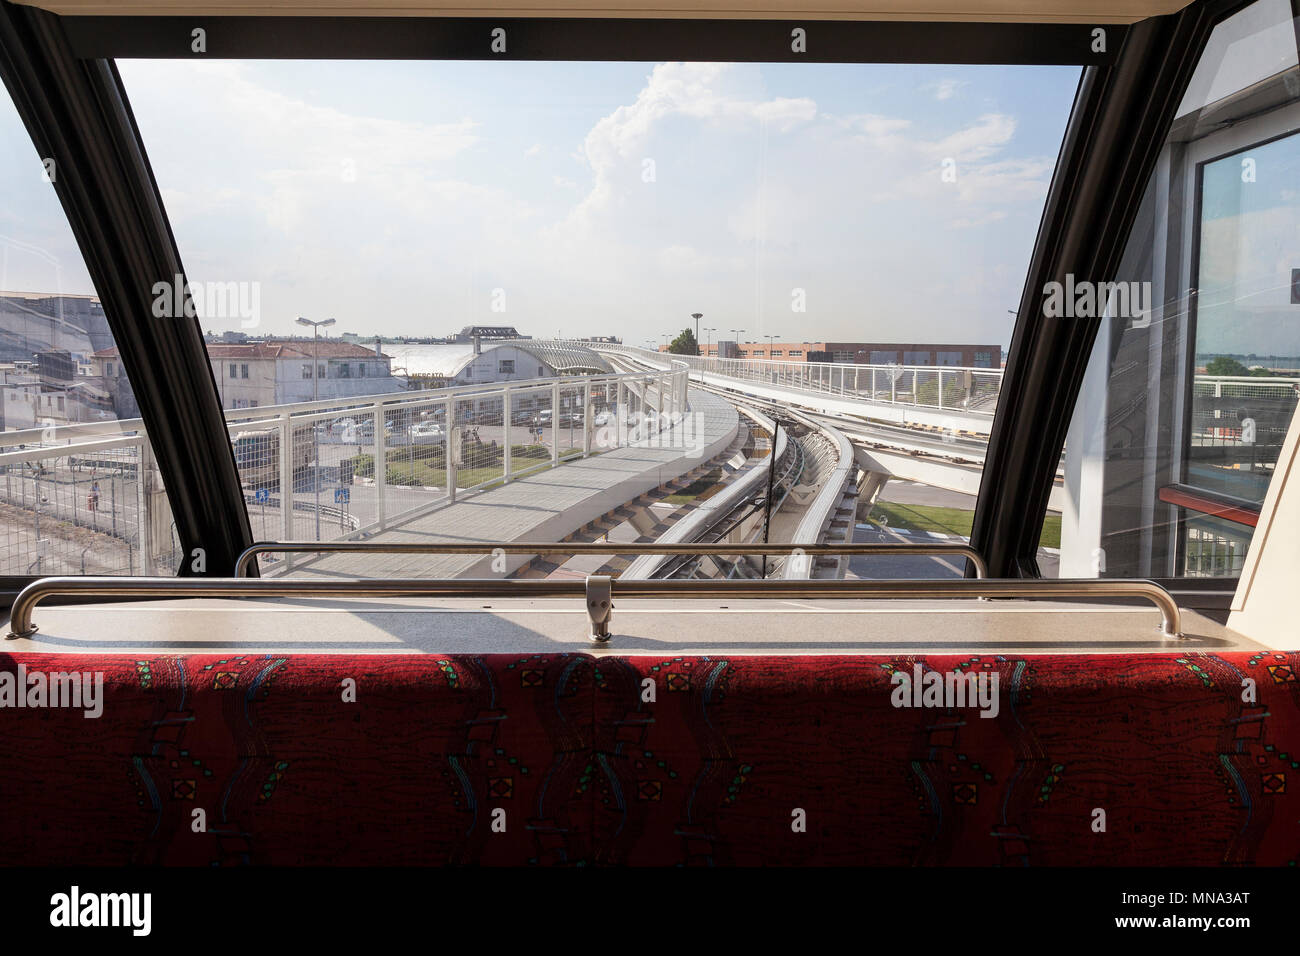 Venice People Mover Series: View through the windscreen of the Venice People Mover, Venice, Italy showing the elevated track ahead . First person POV Stock Photo